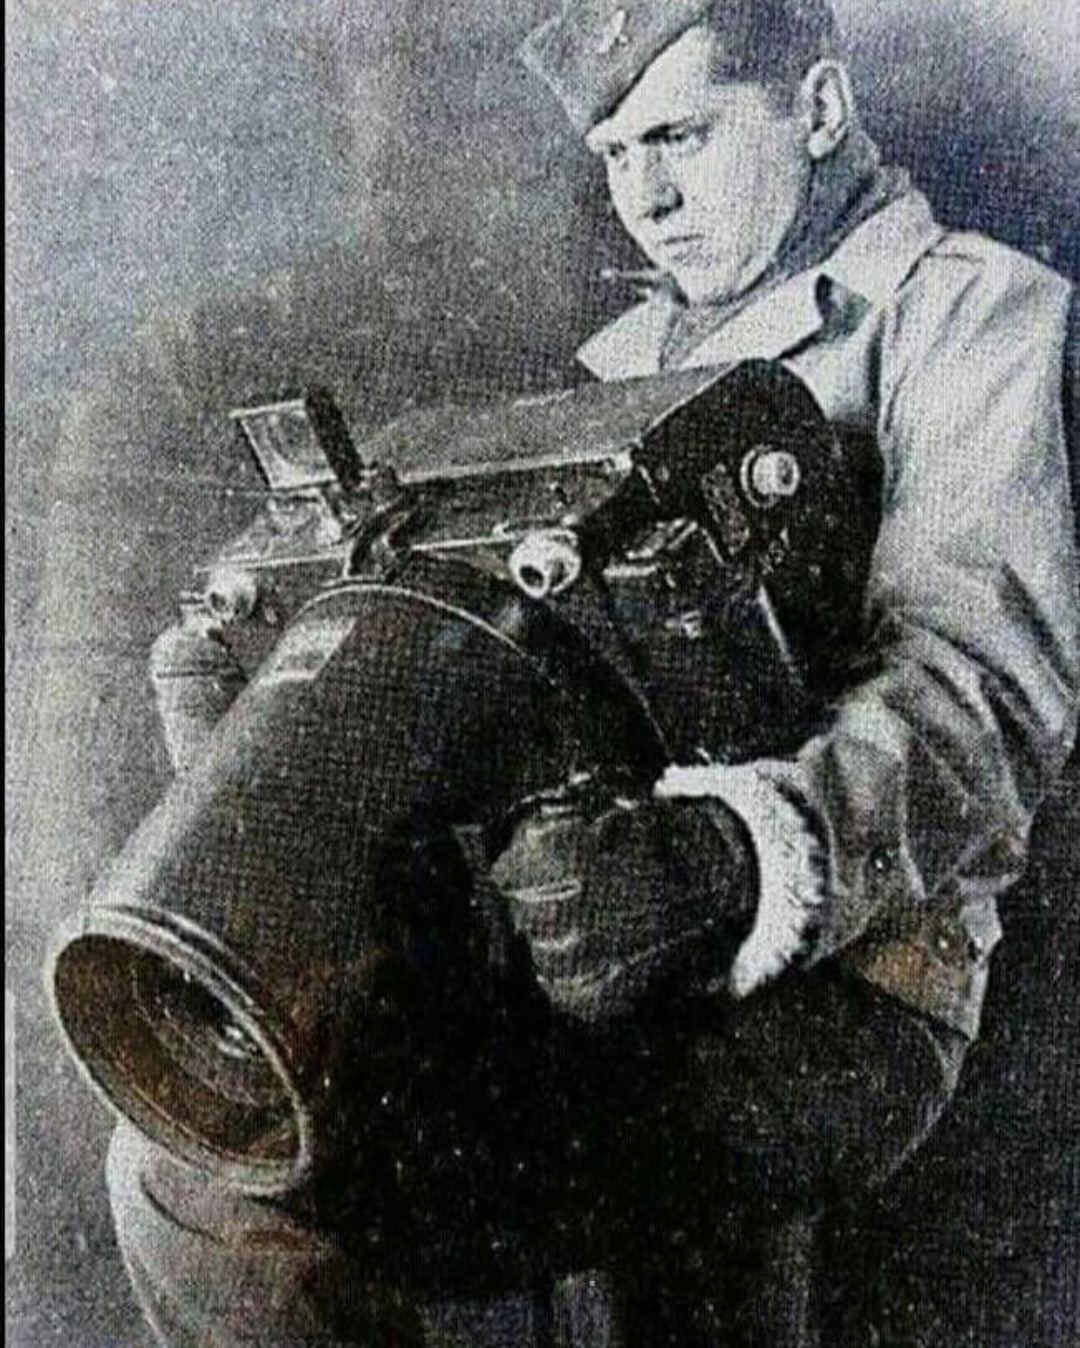 A Kodak camera used for aerial spy photography during WW2.